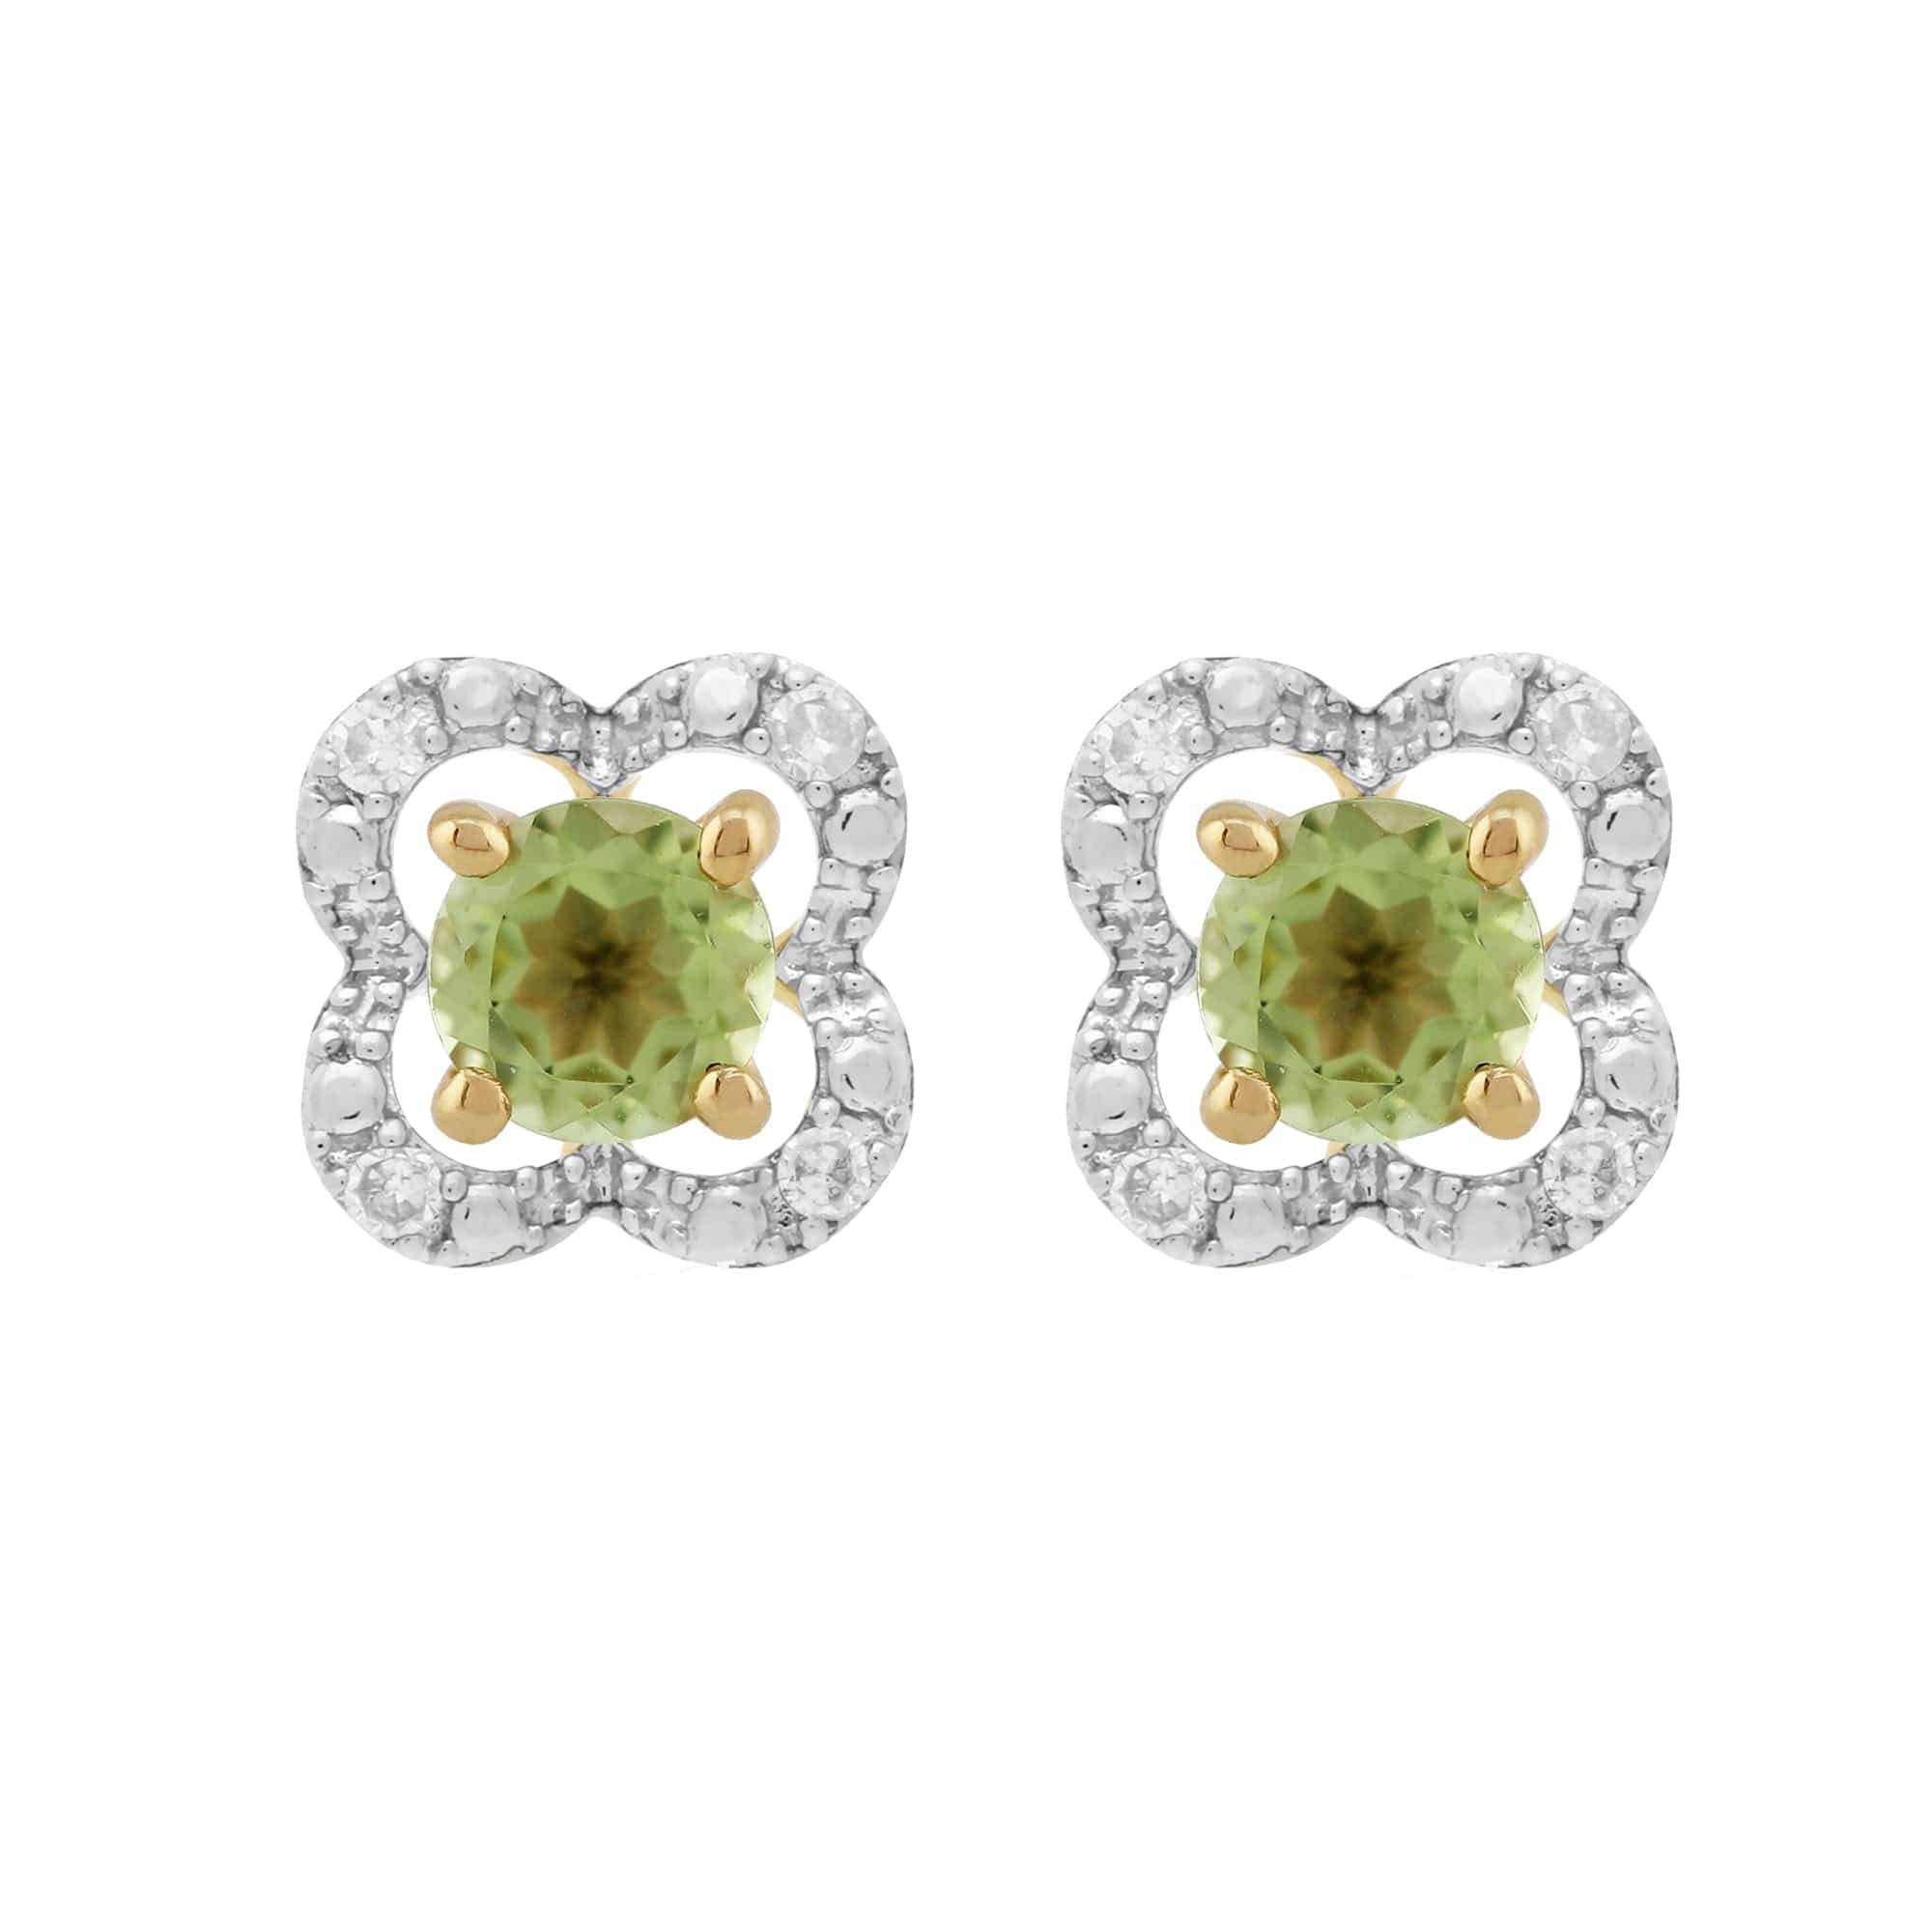 11562-191E0375019 Classic Round Peridot Stud Earrings with Detachable Diamond Floral Ear Jacket in 9ct Yellow Gold 1